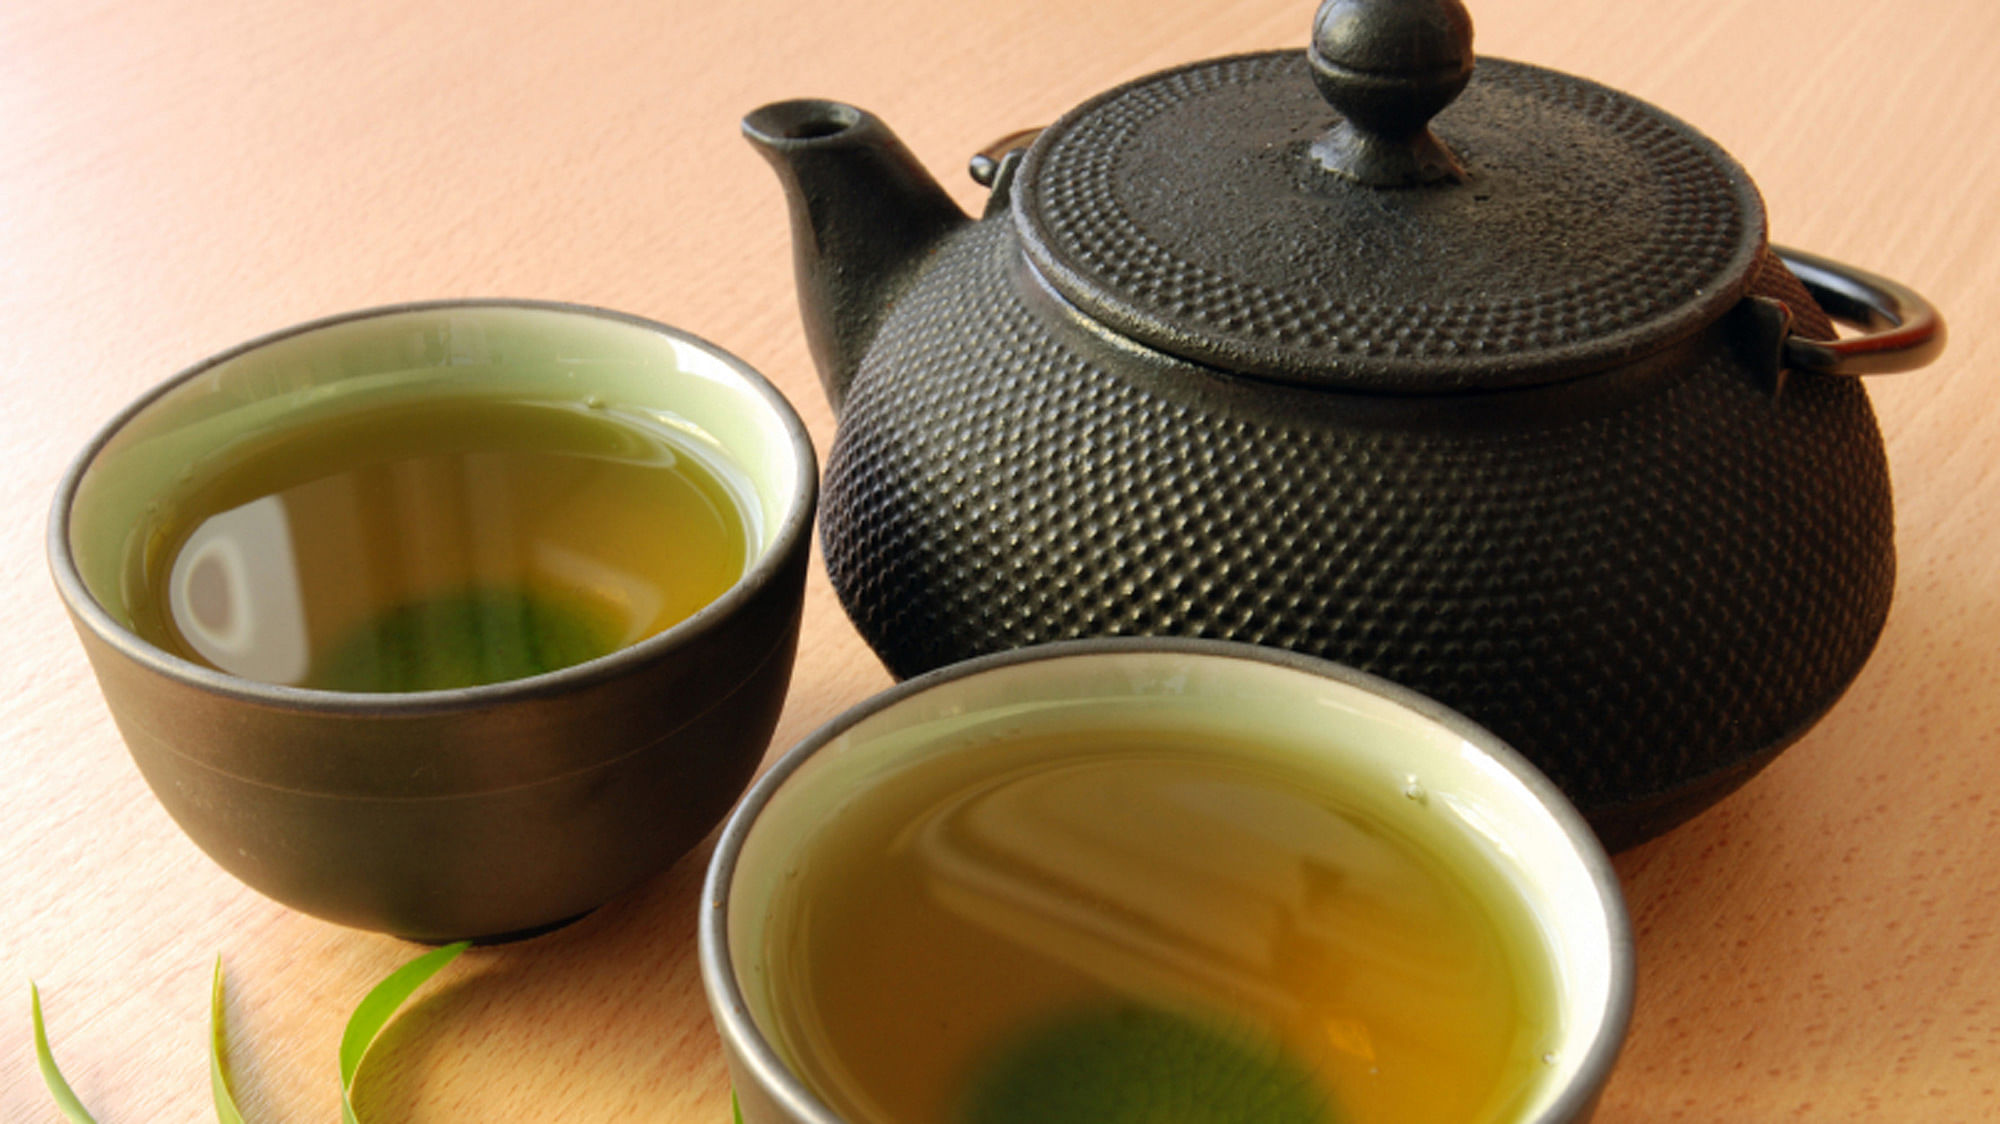 A recent study says one should avoid too much green tea. (Photo: iStockphoto)